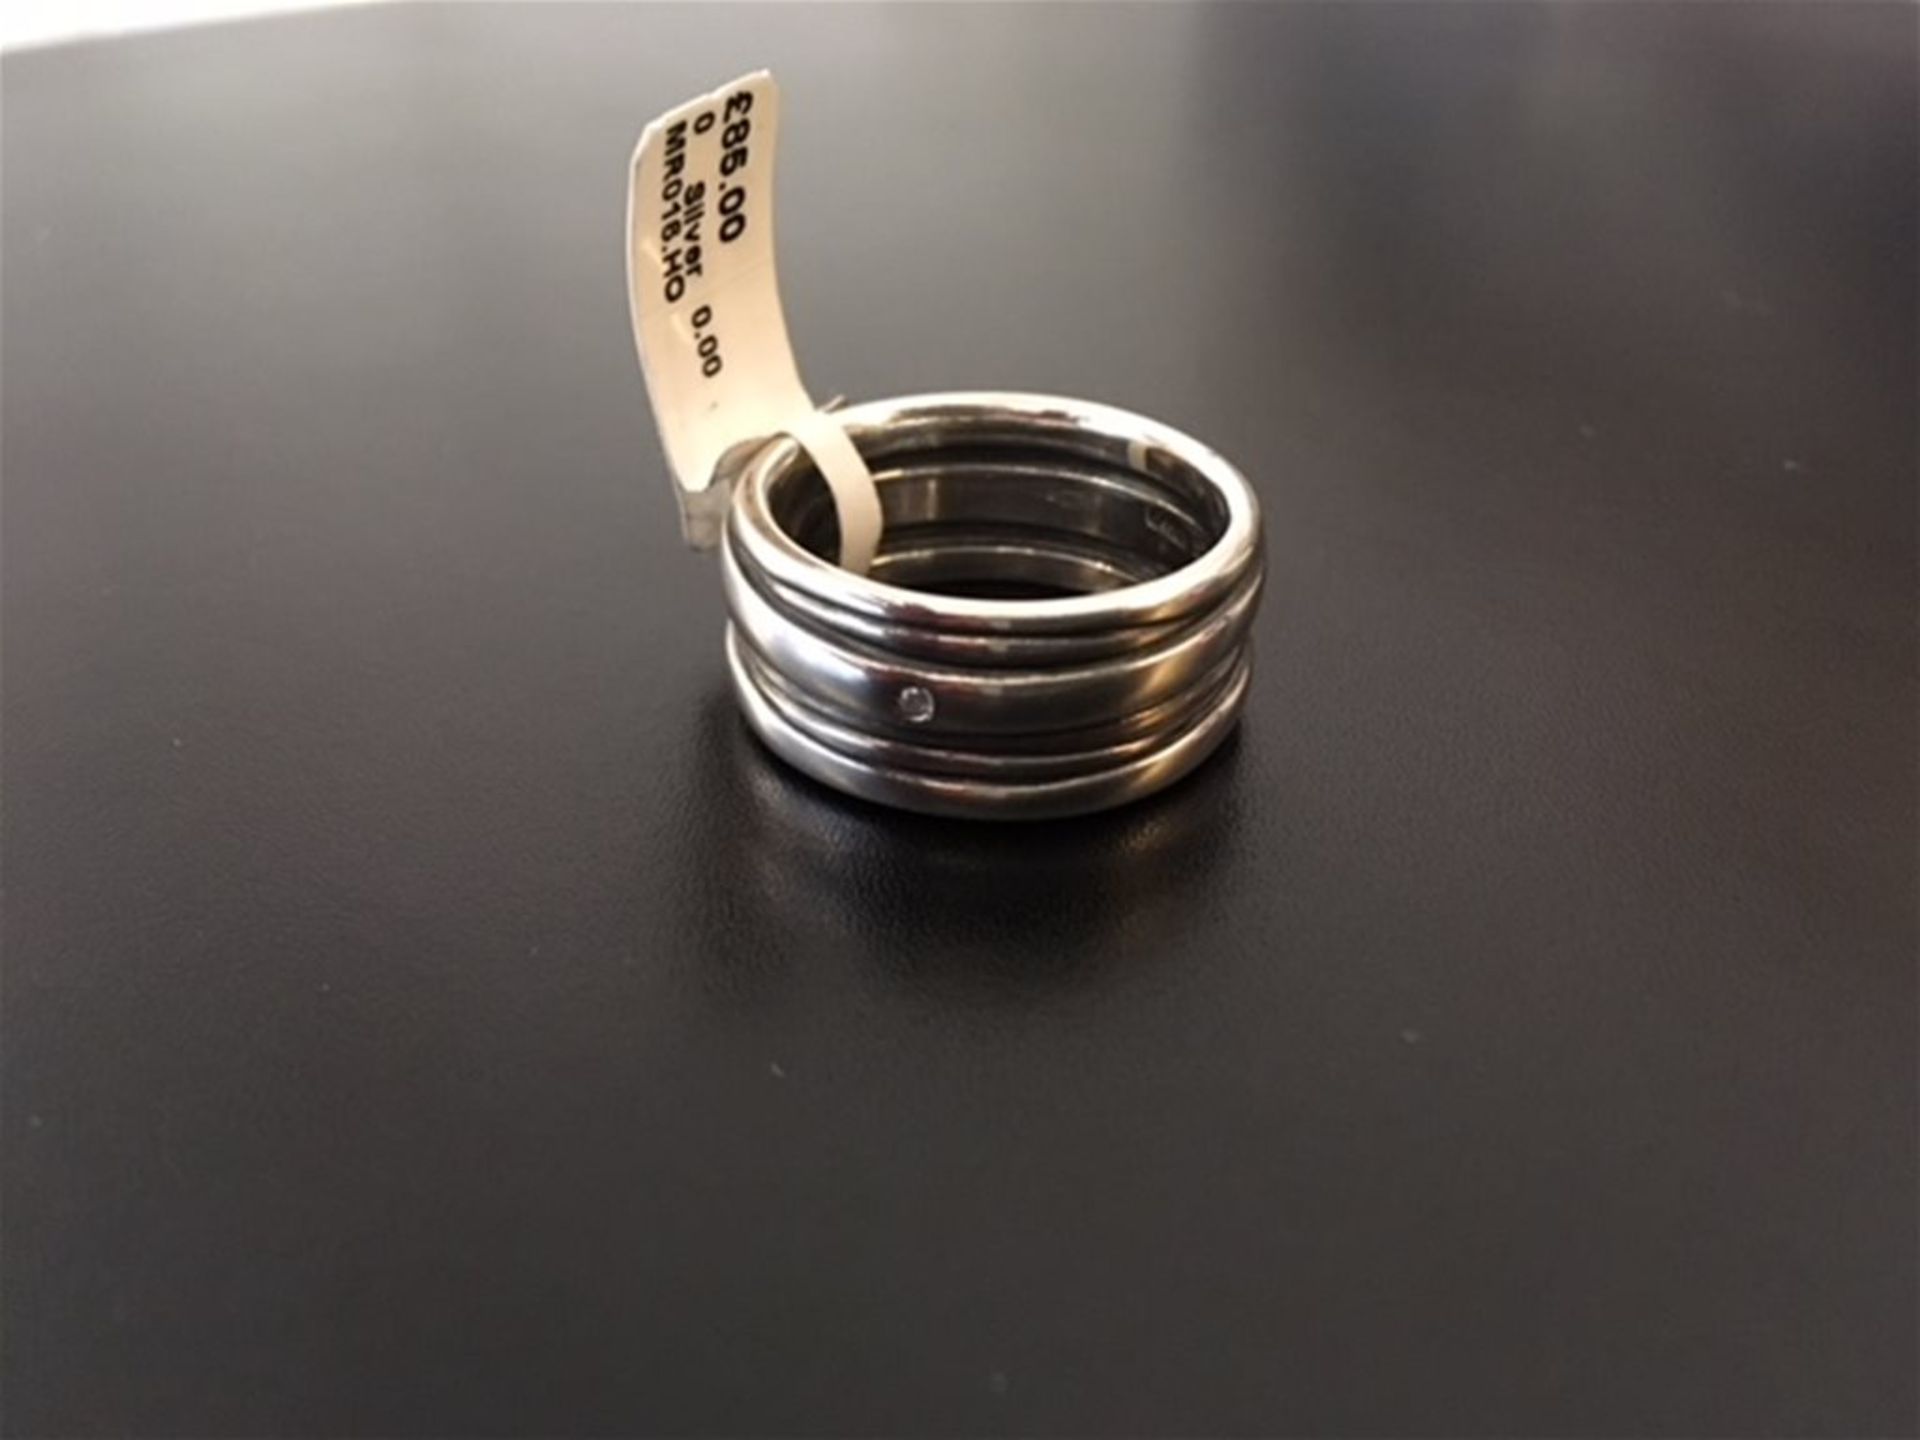 Mens silver ring - Image 2 of 2